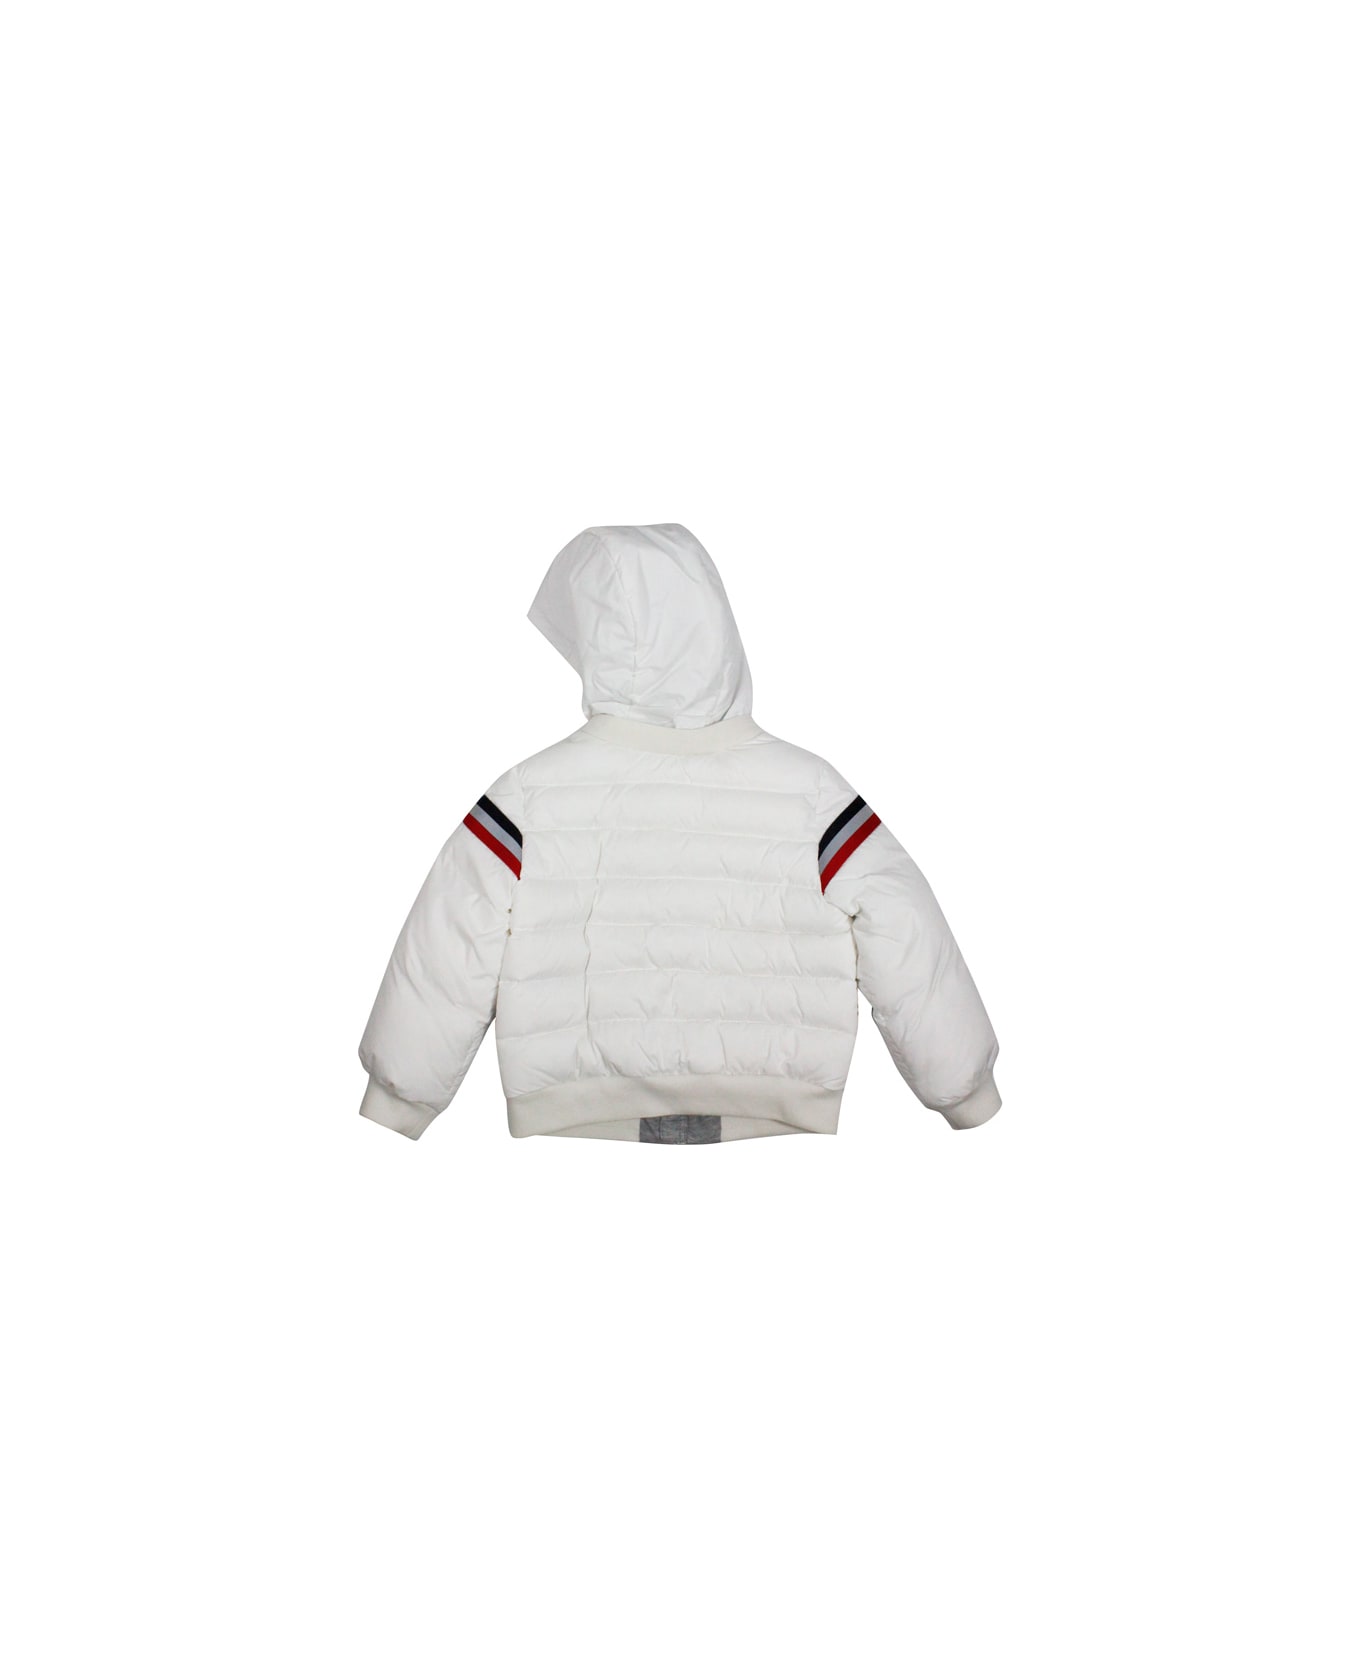 Moncler Perd Down Jacket With Hood - White